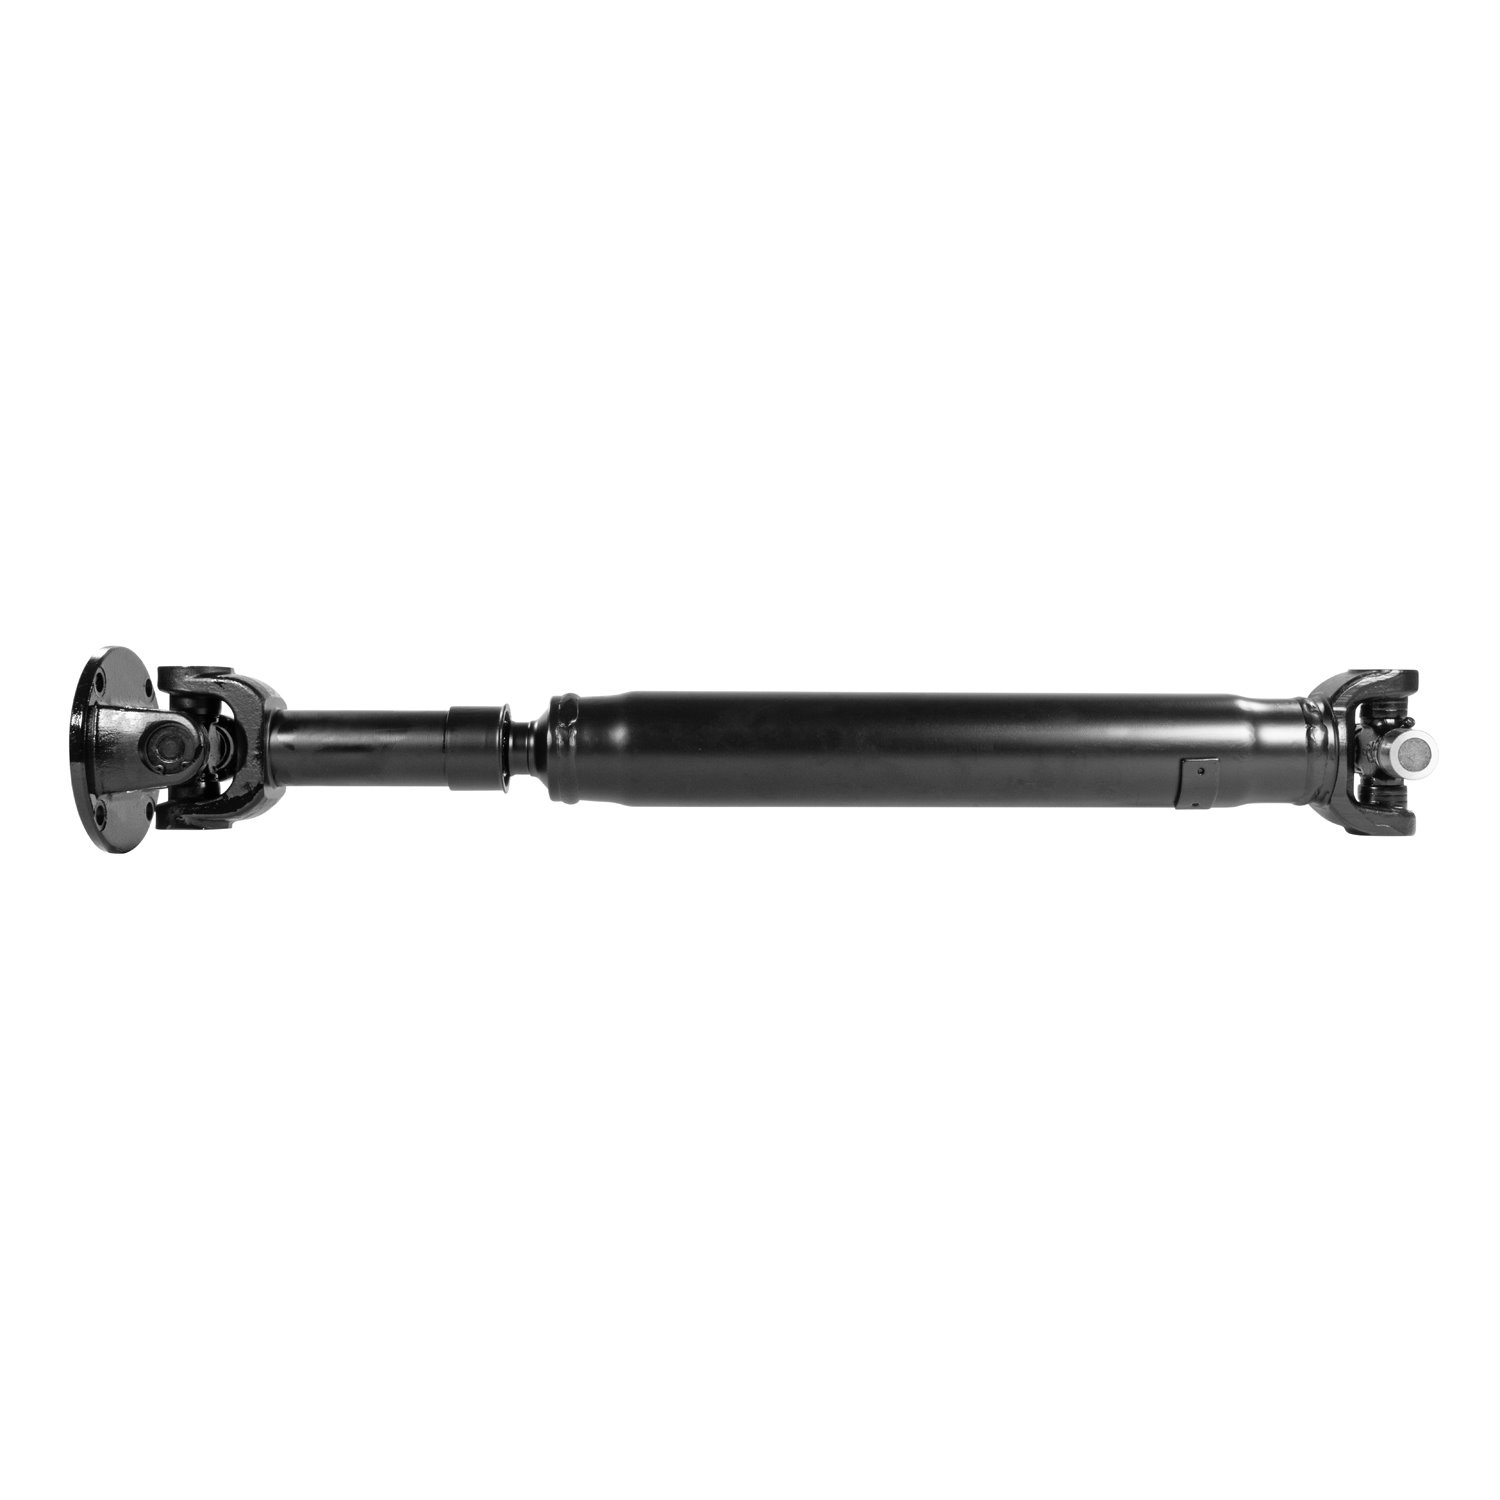 USA Standard ZDS9346 Front Driveshaft, For GM Truck & Suv, 28-1/2 in. Center-To-Center